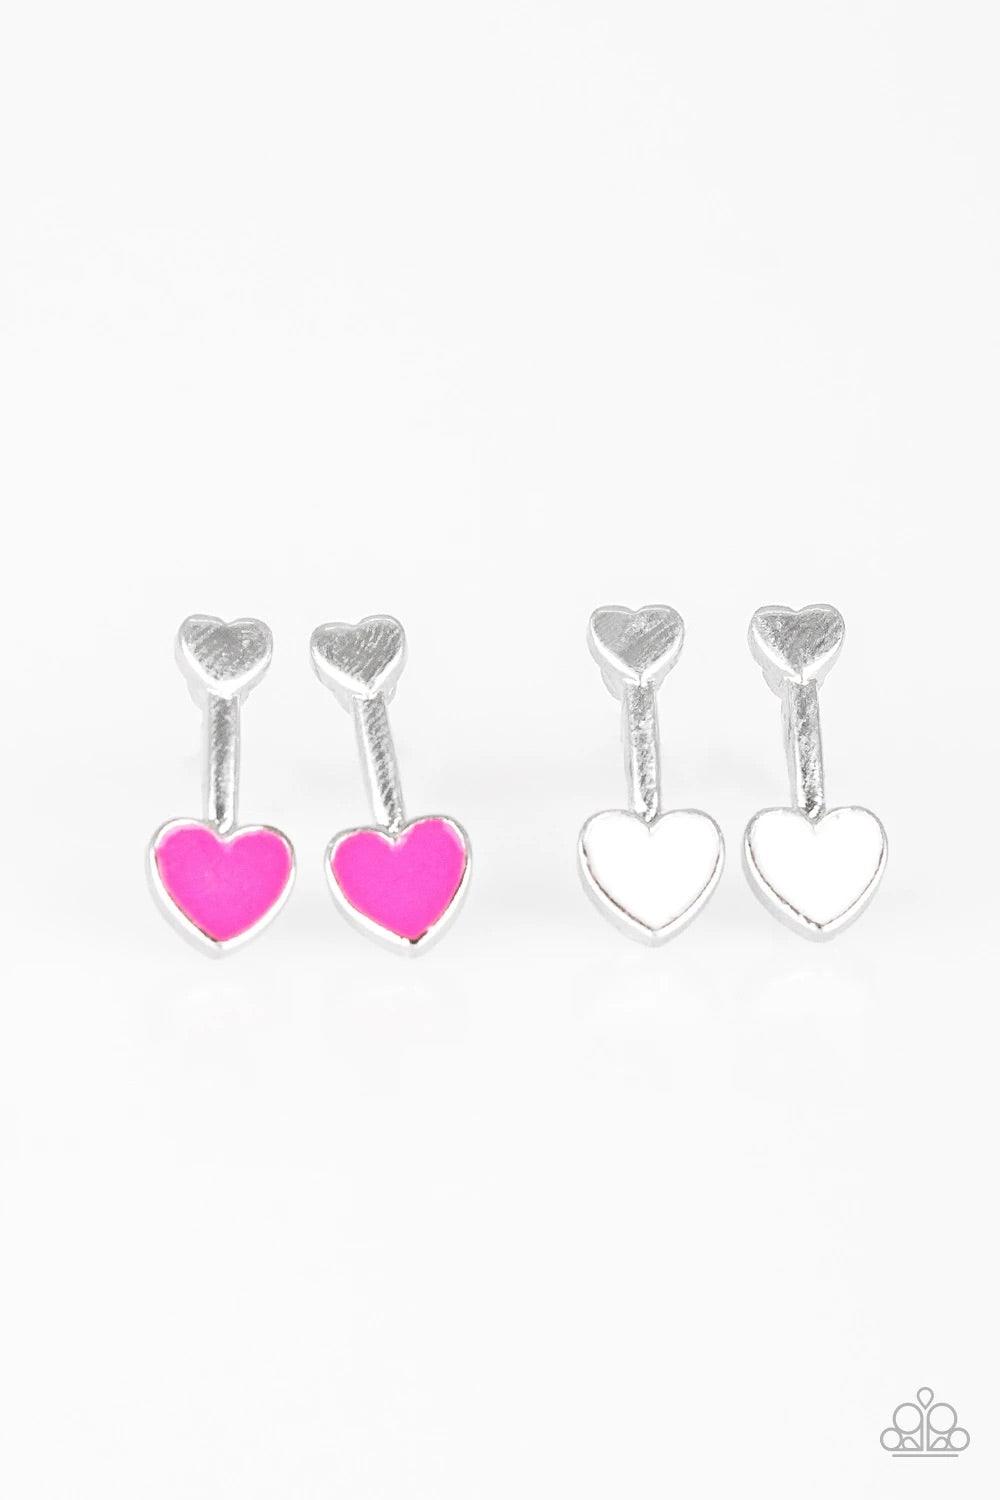 Paparazzi Accessories Starlet Shimmer Earrings: #20 - Light Pink Jewelry